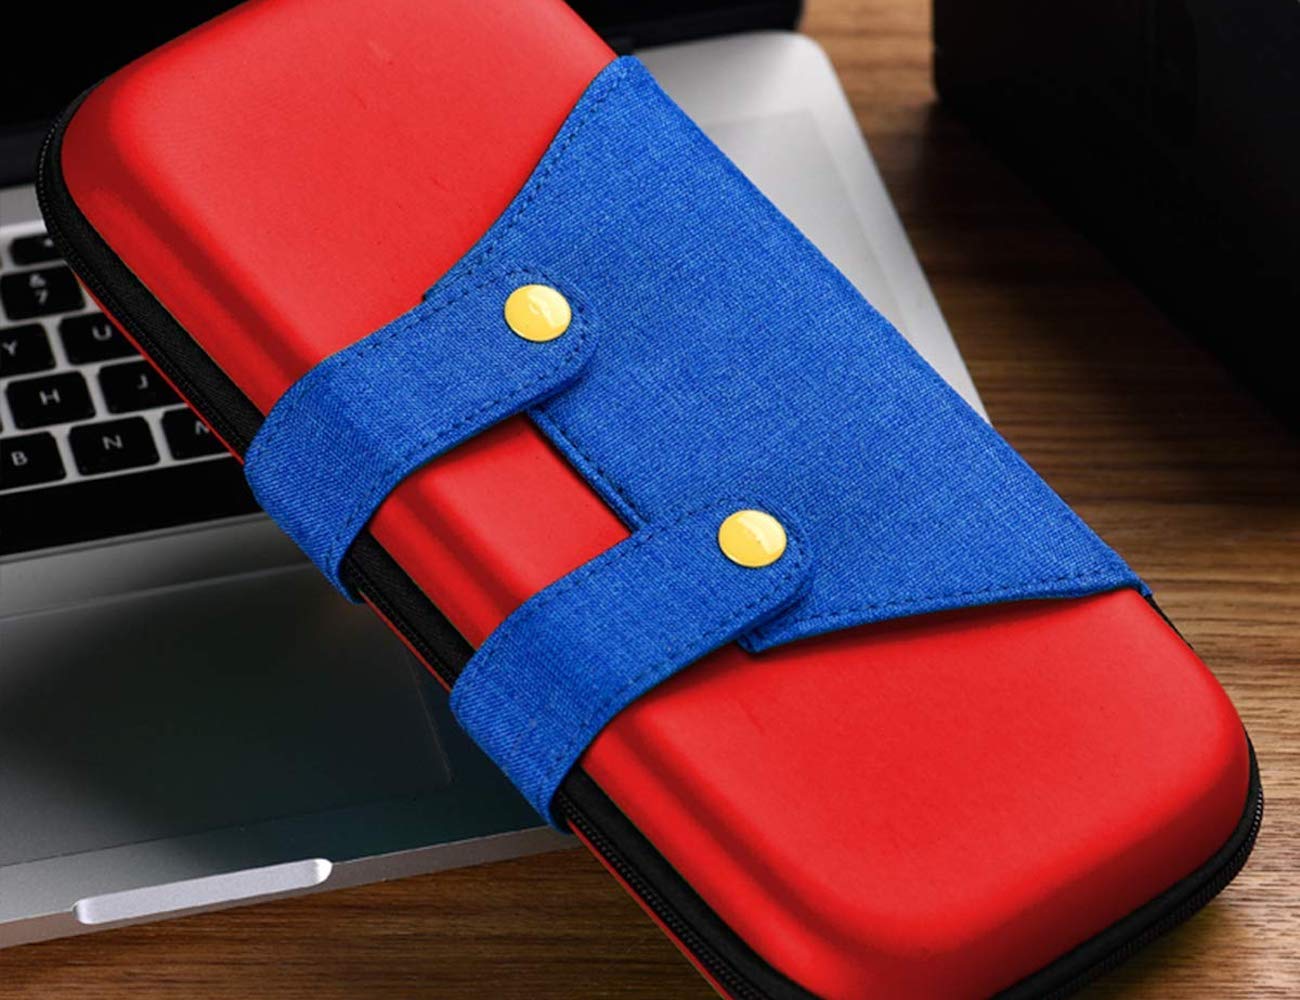 Nintendo Switch Case is designed to look like it’s a character in a game